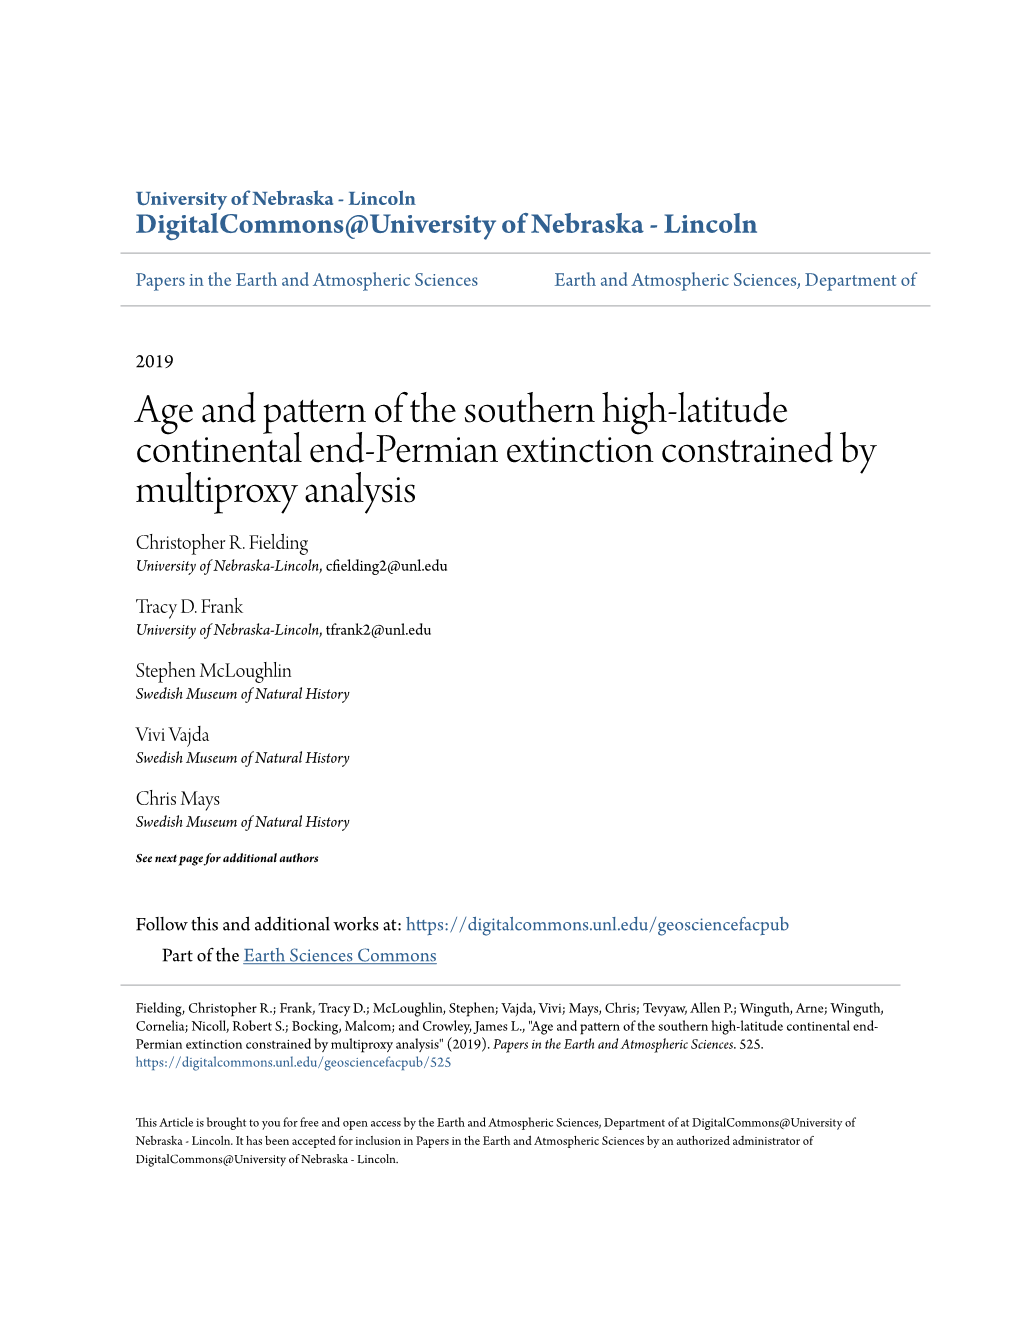 Age and Pattern of the Southern High-Latitude Continental End-Permian Extinction Constrained by Multiproxy Analysis Christopher R